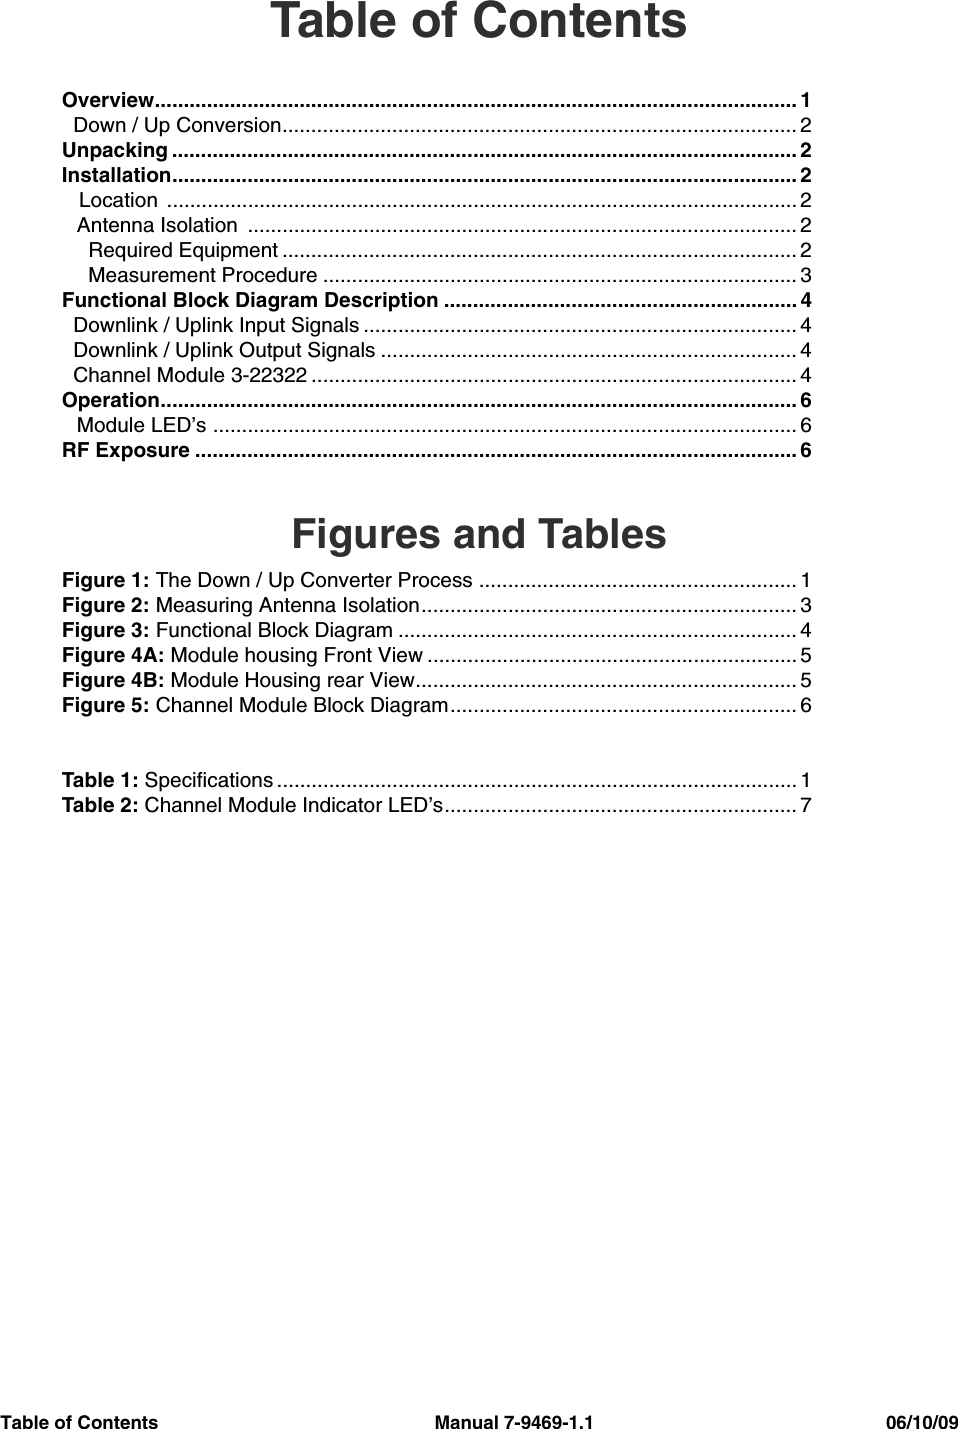 Table of Contents                                                     Manual 7-9469-1.1                                                        06/10/09Table of ContentsOverview............................................................................................................... 1  Down / Up Conversion......................................................................................... 2Unpacking ............................................................................................................ 2Installation............................................................................................................ 2   Location  ............................................................................................................. 2Antenna Isolation  ............................................................................................... 2  Required Equipment ......................................................................................... 2  Measurement Procedure .................................................................................. 3Functional Block Diagram Description ............................................................. 4  Downlink / Uplink Input Signals ........................................................................... 4  Downlink / Uplink Output Signals ........................................................................ 4  Channel Module 3-22322 .................................................................................... 4Operation.............................................................................................................. 6Module LED’s ..................................................................................................... 6RF Exposure ........................................................................................................ 6Figures and TablesFigure 1: The Down / Up Converter Process ....................................................... 1Figure 2: Measuring Antenna Isolation................................................................. 3Figure 3: Functional Block Diagram ..................................................................... 4Figure 4A: Module housing Front View ................................................................ 5Figure 4B: Module Housing rear View.................................................................. 5Figure 5: Channel Module Block Diagram............................................................ 6Table 1: Specifications .......................................................................................... 1Table 2: Channel Module Indicator LED’s............................................................. 7